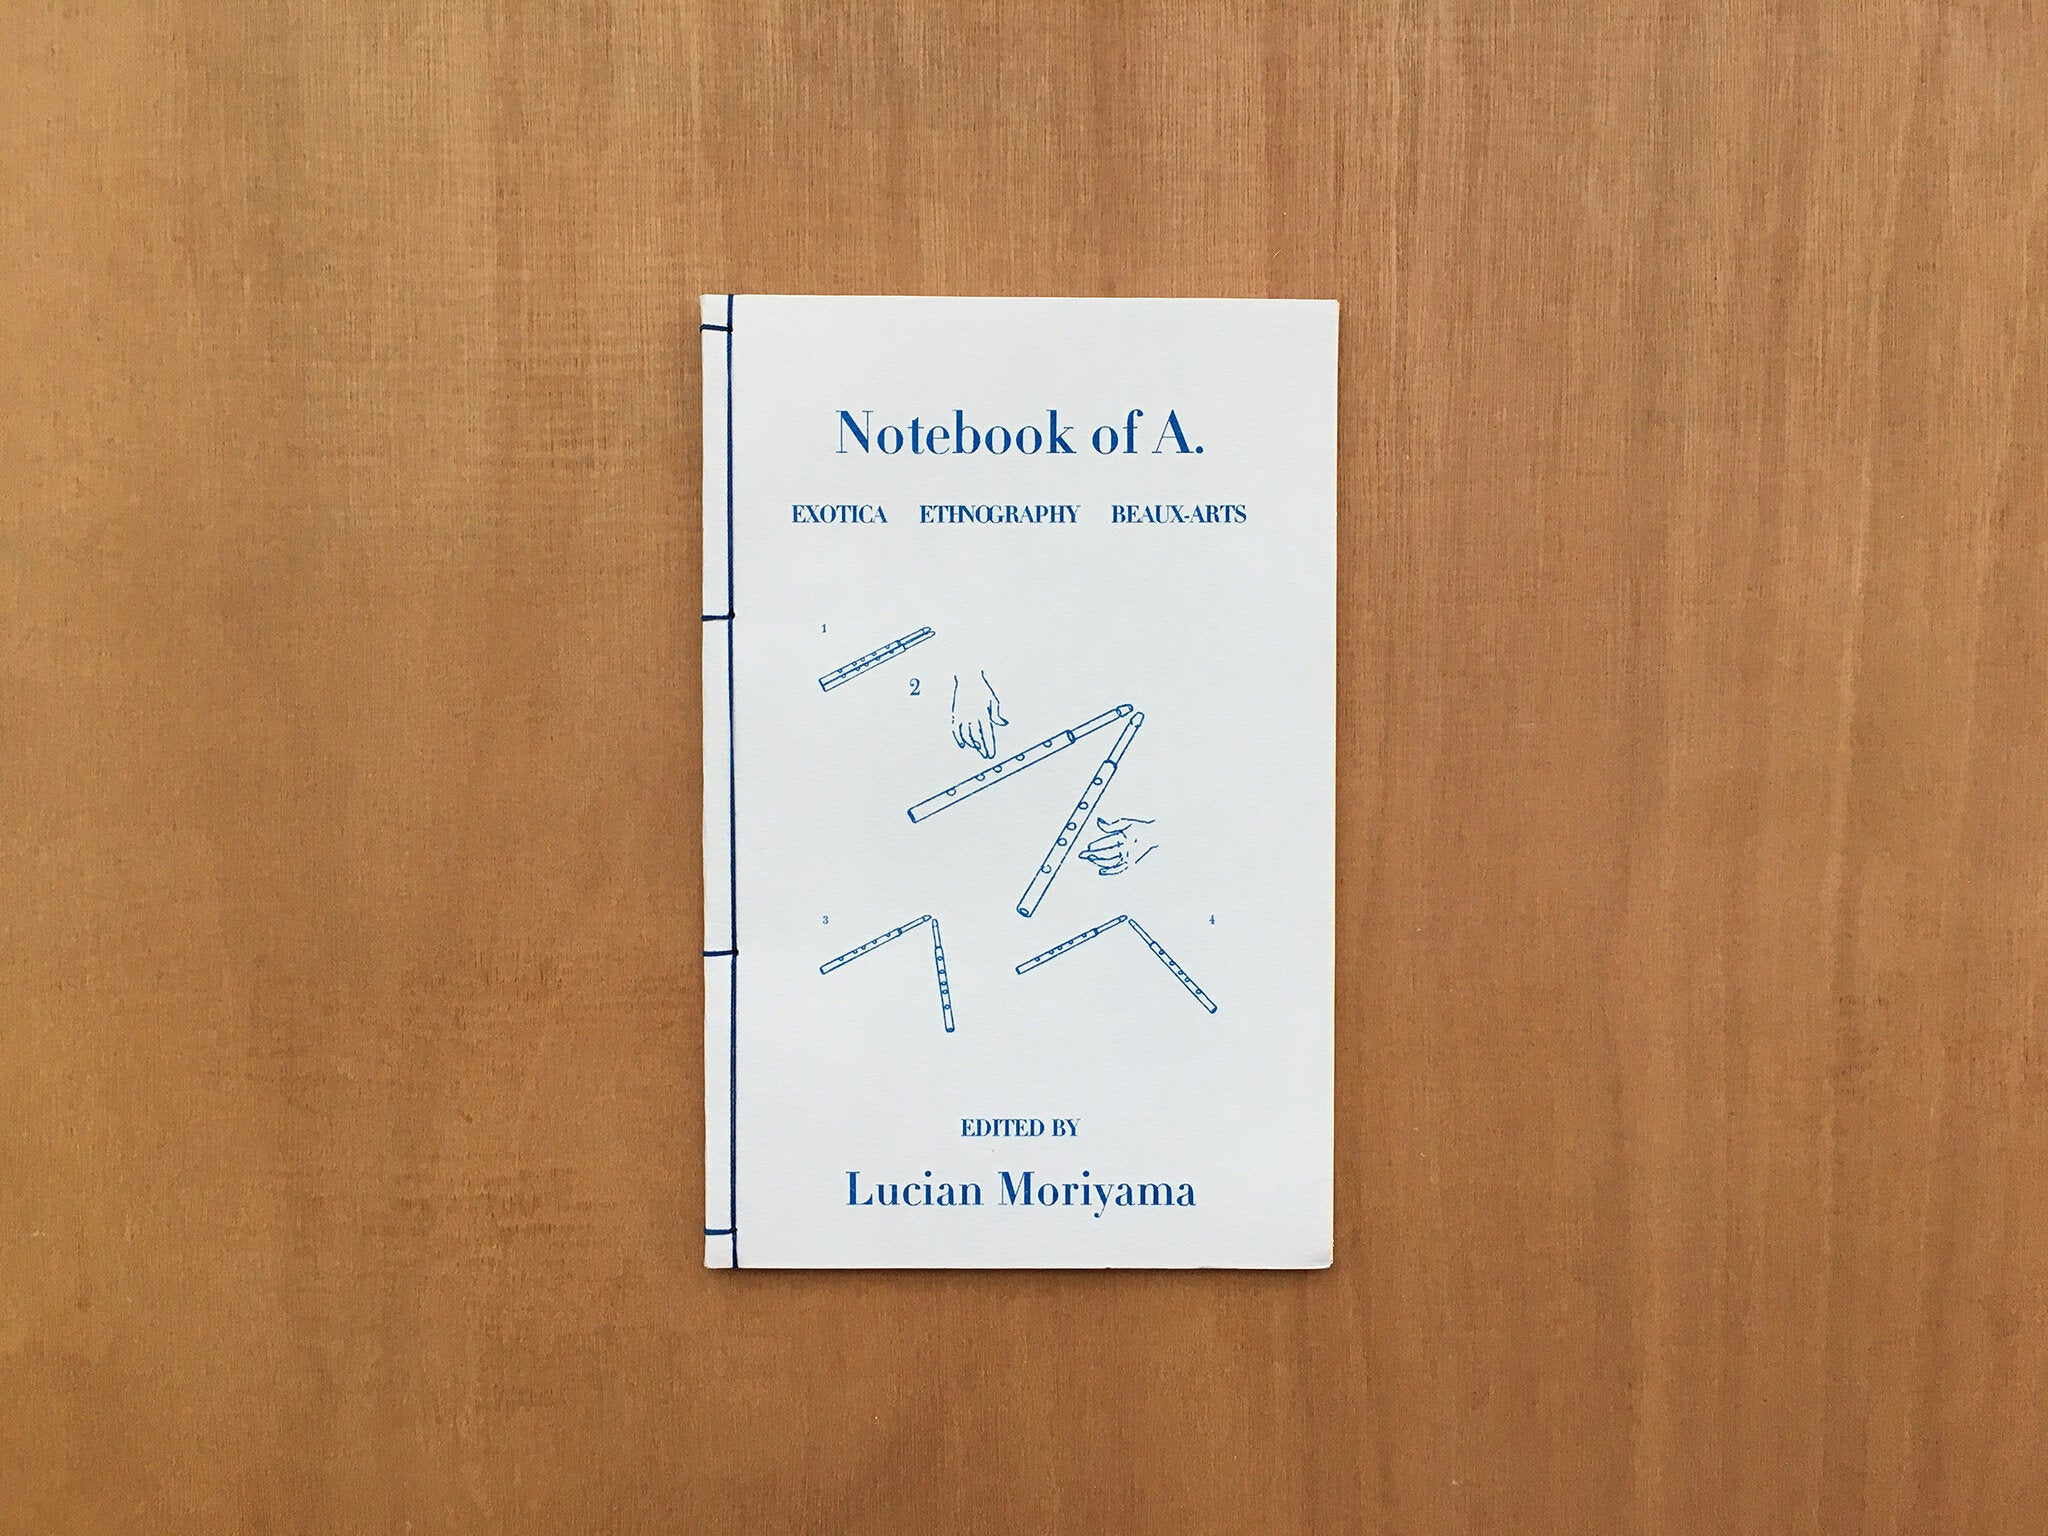 NOTEBOOK OF A. by Lucian Moriyama